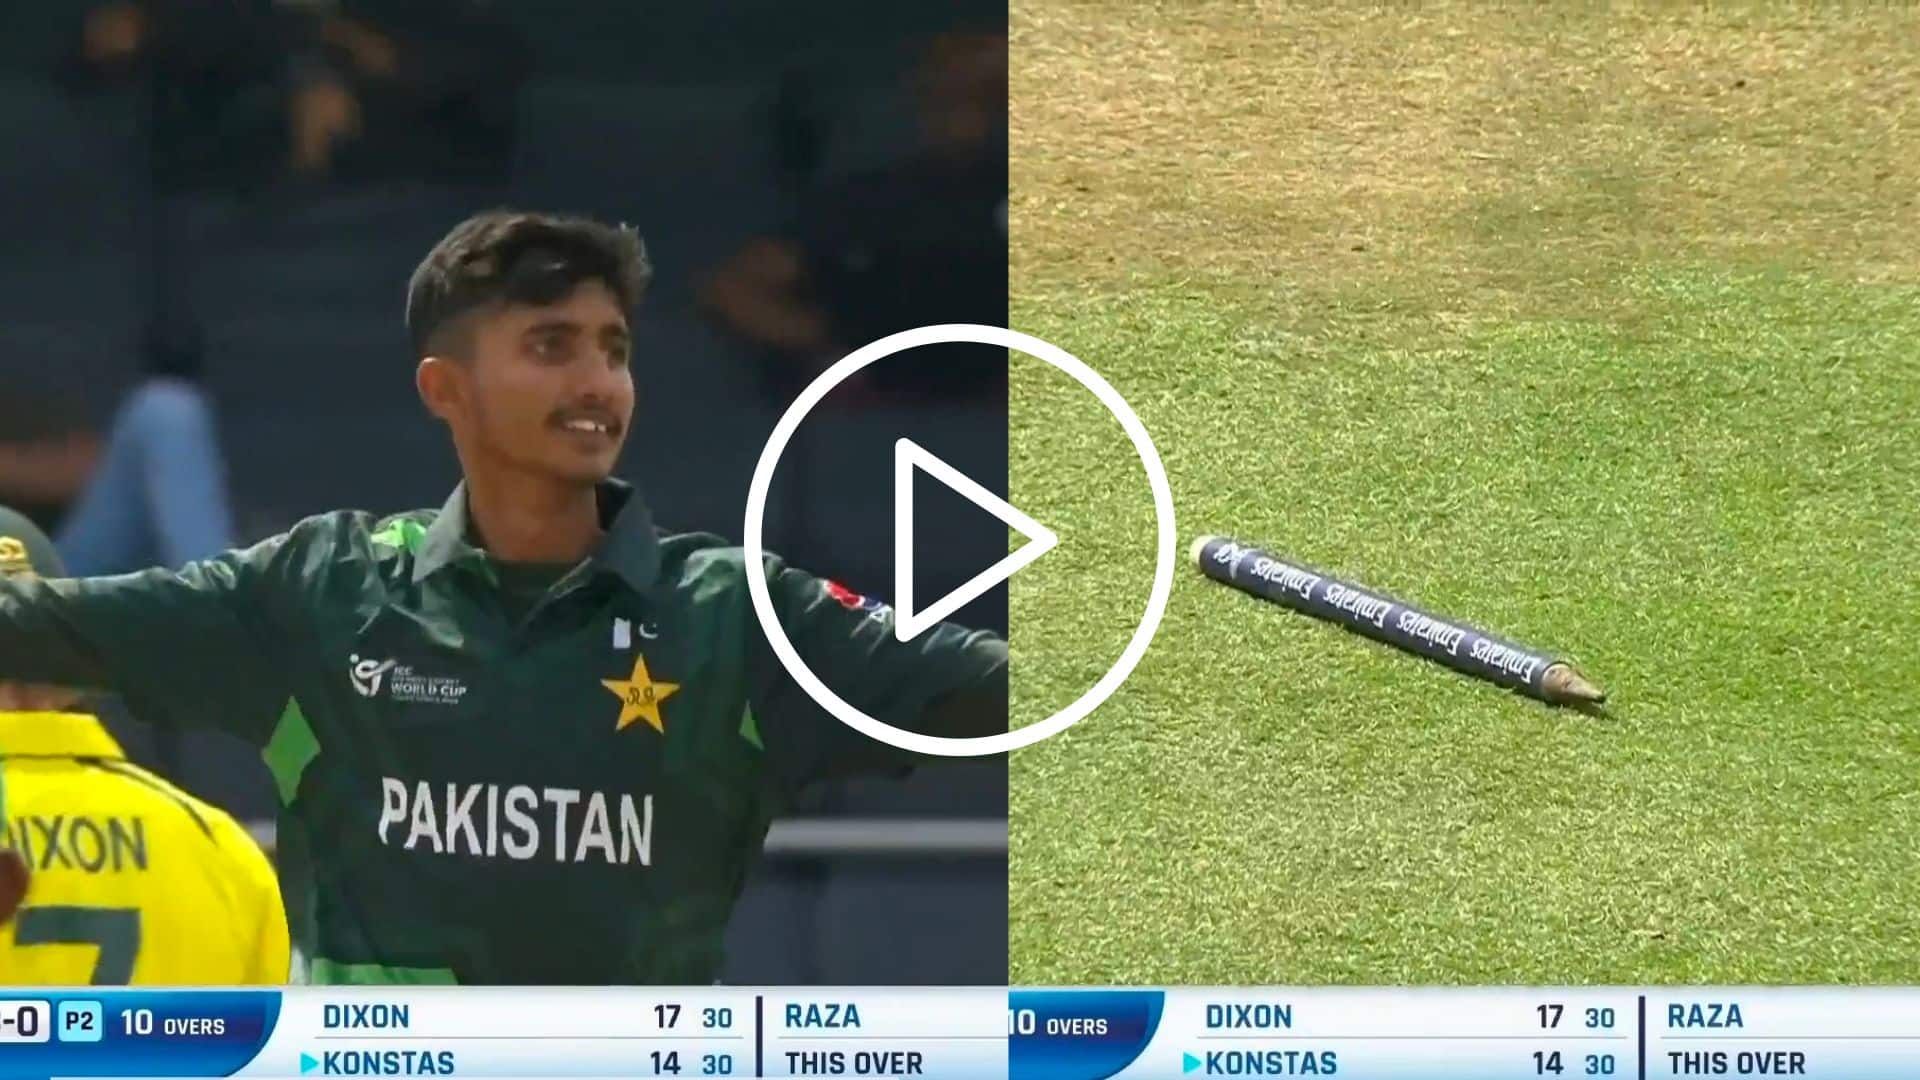 [Watch] Pakistan's Ali Raza Bowls Dream Delivery To Bamboozle Aussie Batter In U19 WC SF